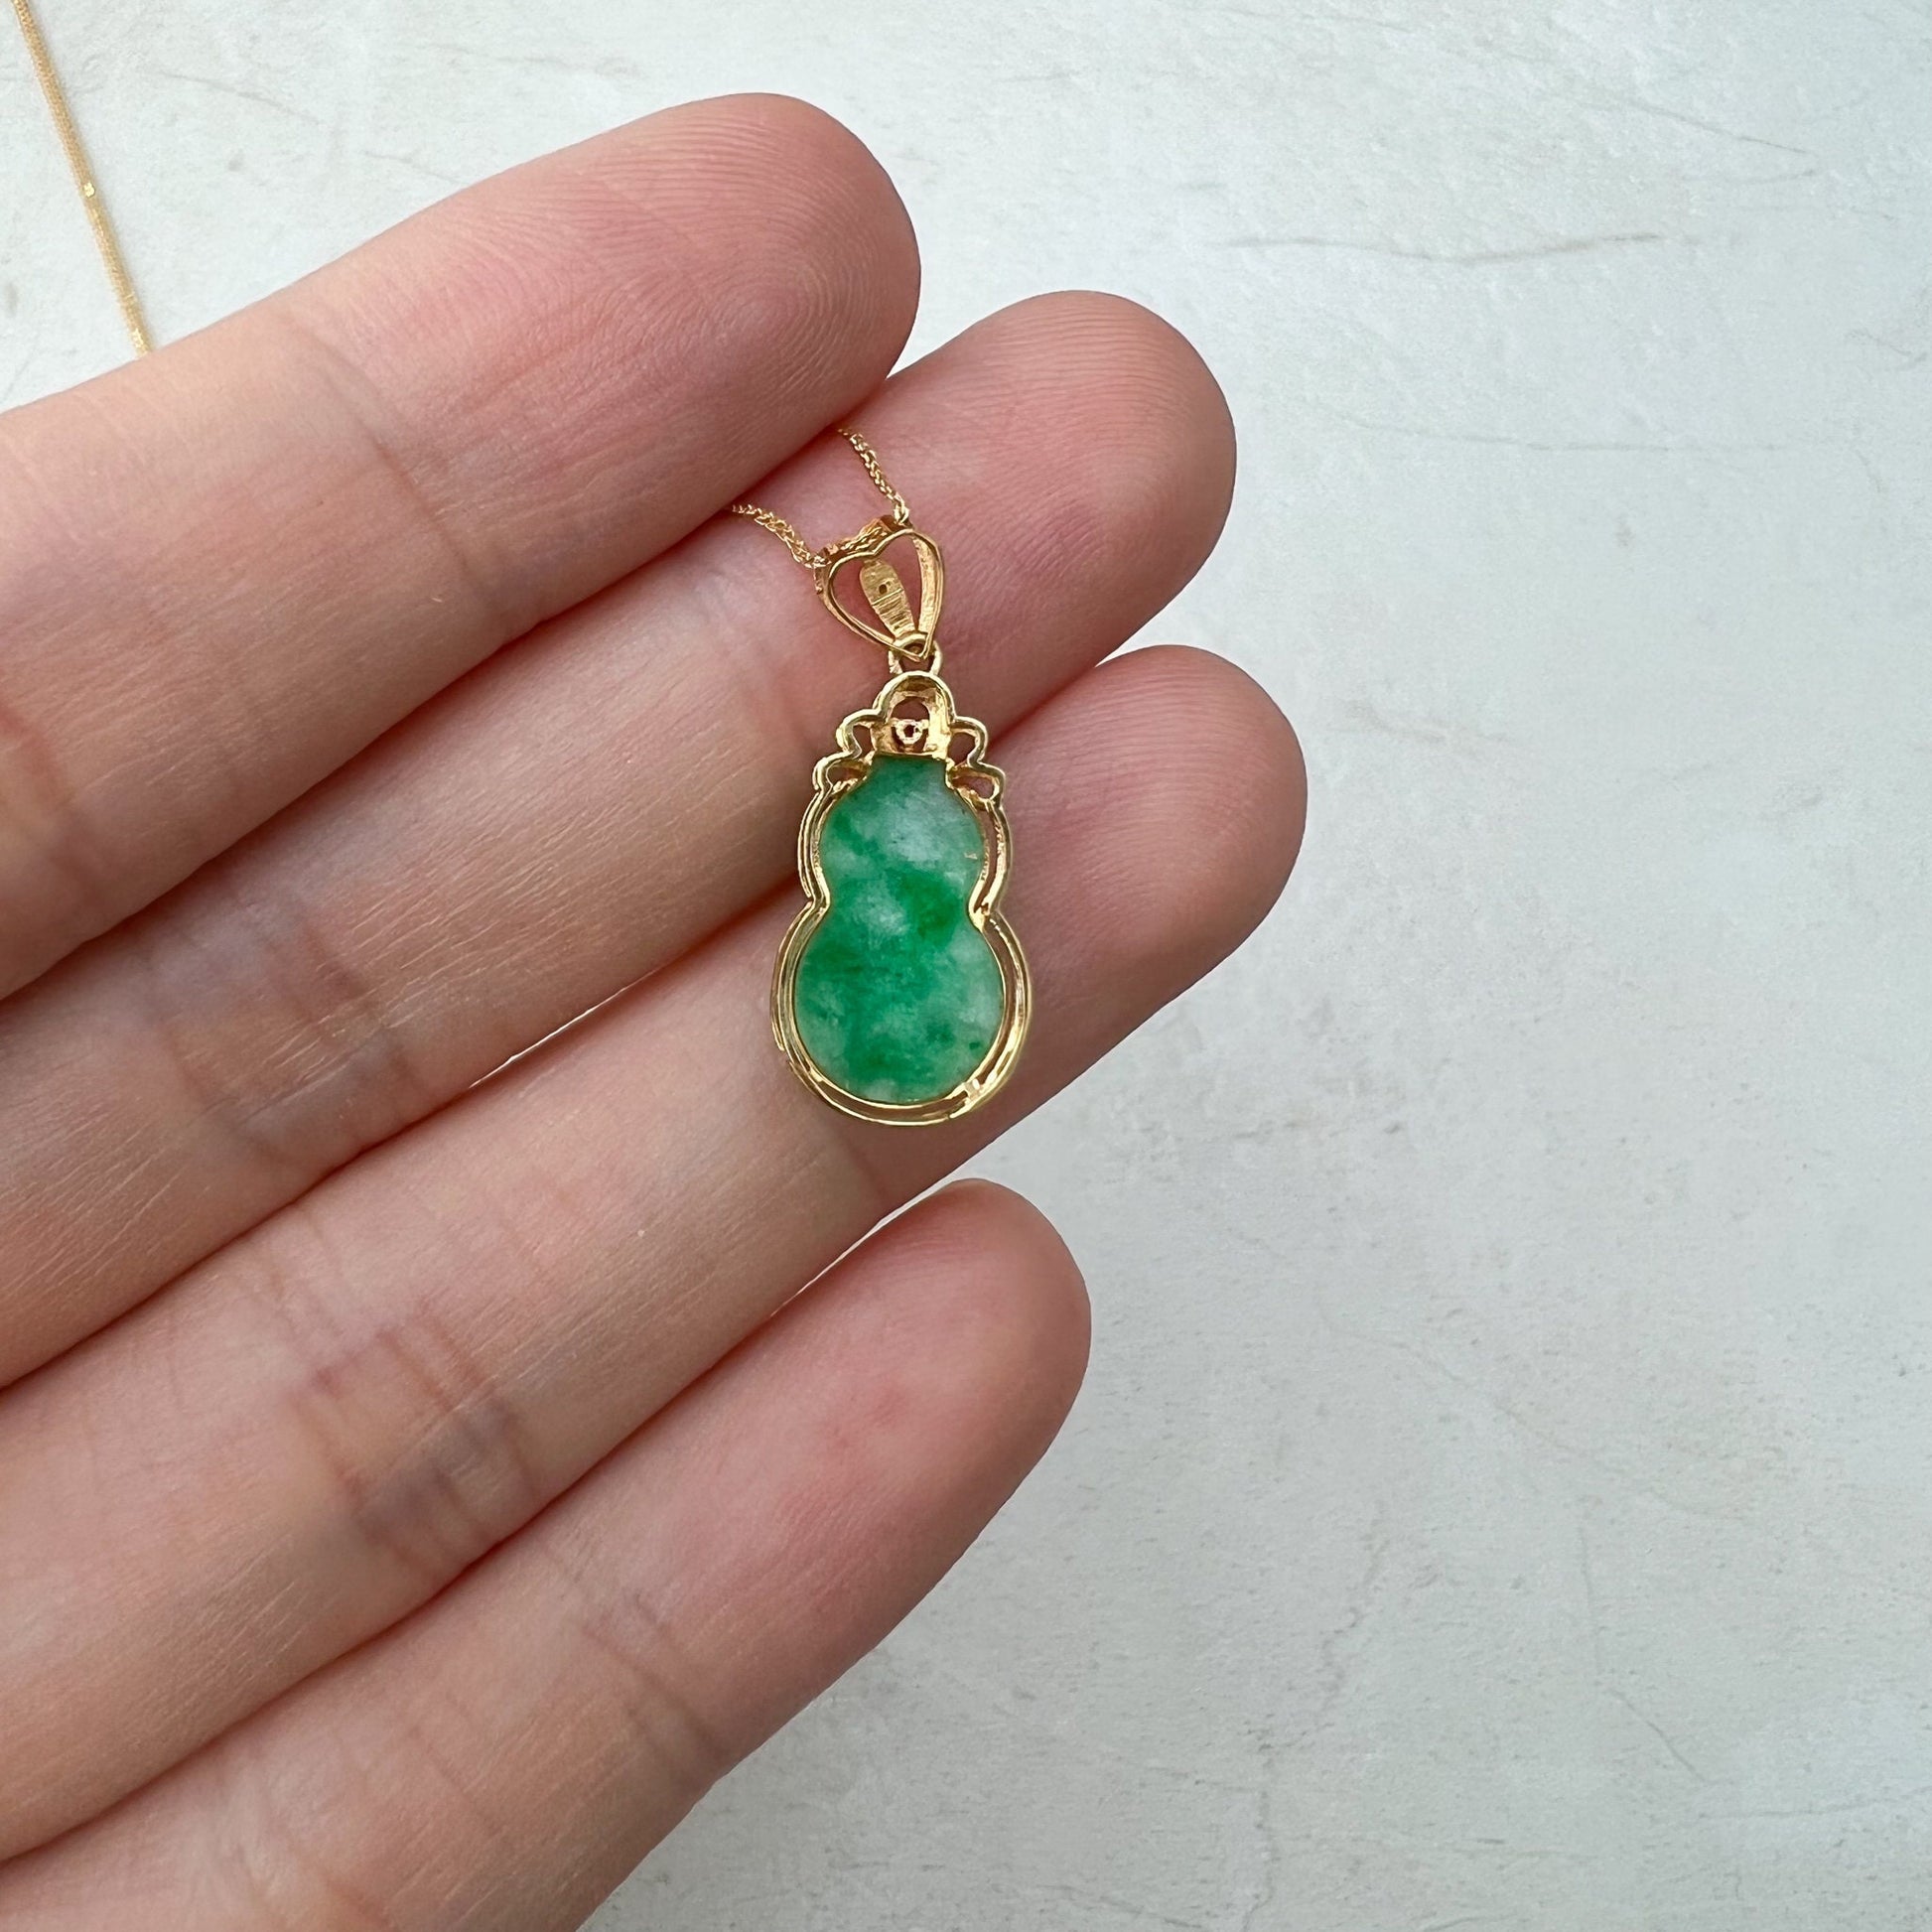 Jade Bottle Gourd, Jadeite Jade, 18K Gold Set, Calabash, Small and Dainty, Hand Carved Pendant Necklace, FSX-0921-1647126338 - AriaDesignCollection